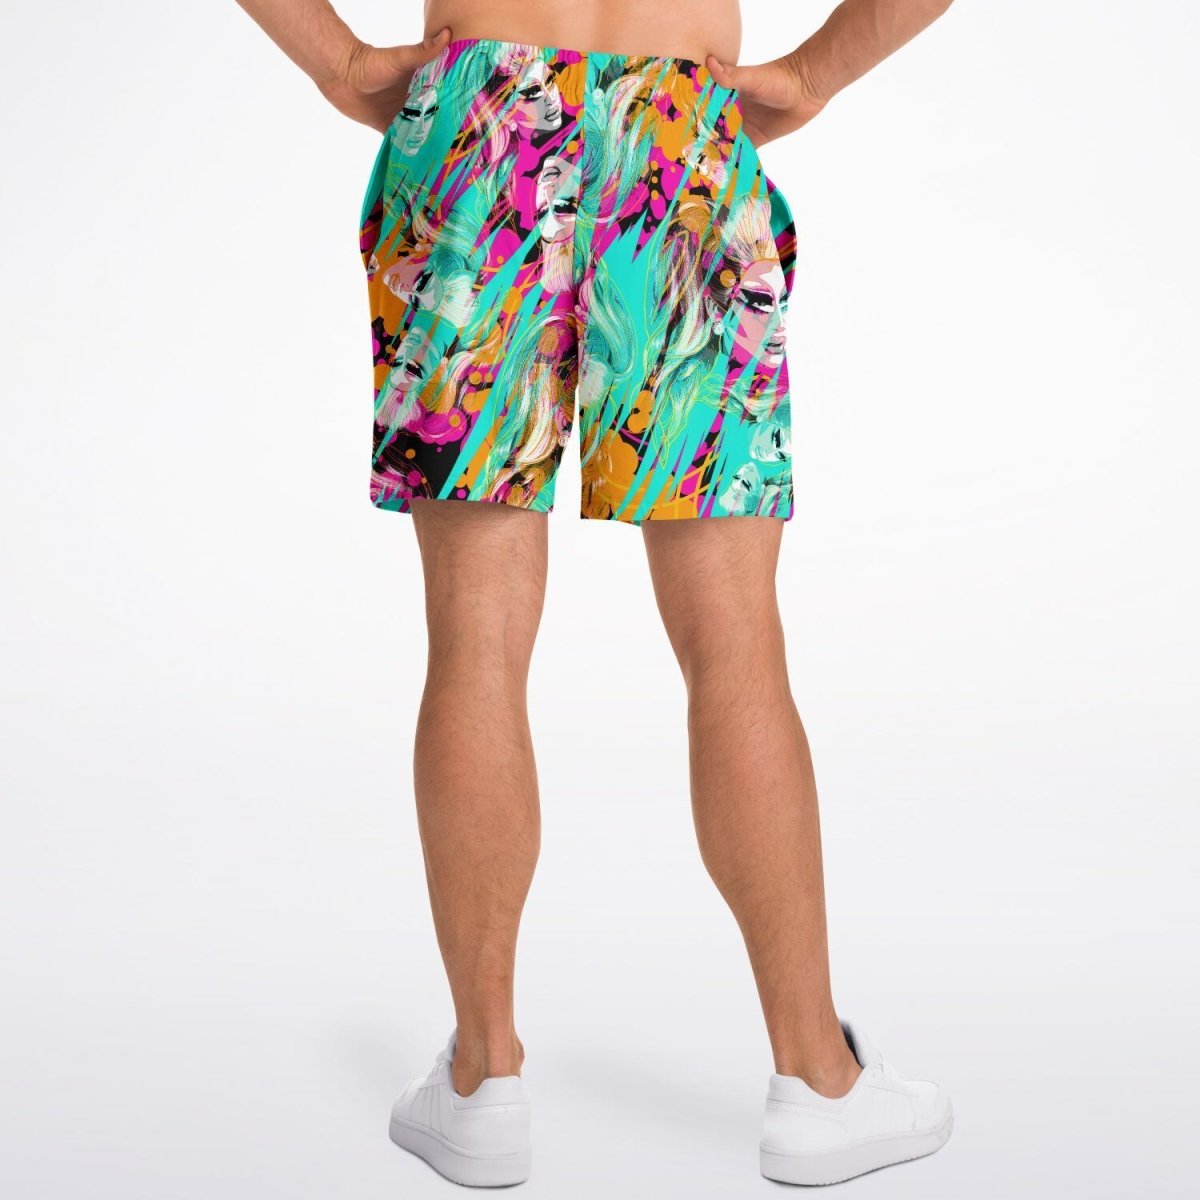 Trixie Mattel "Palm Springs Collection" Drawstring Waist Shorts - dragqueenmerch